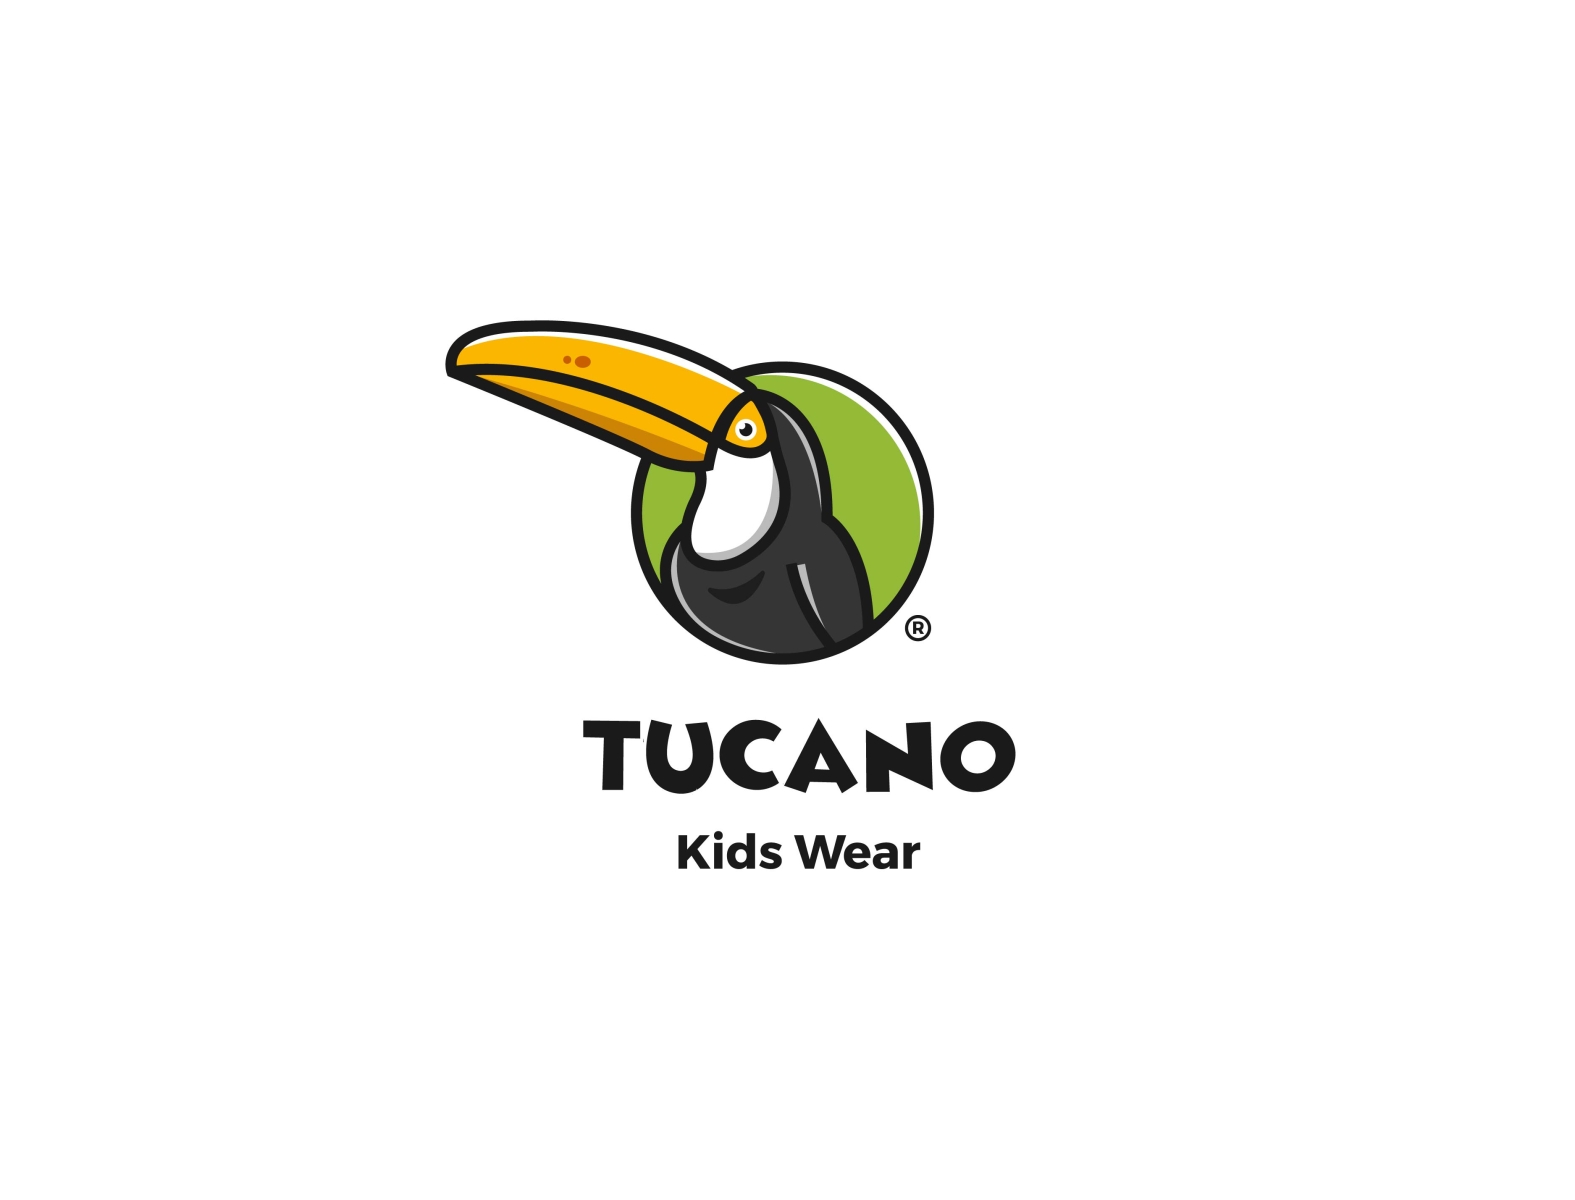 Fly a kids wear logo by SvjGraphic on Dribbble